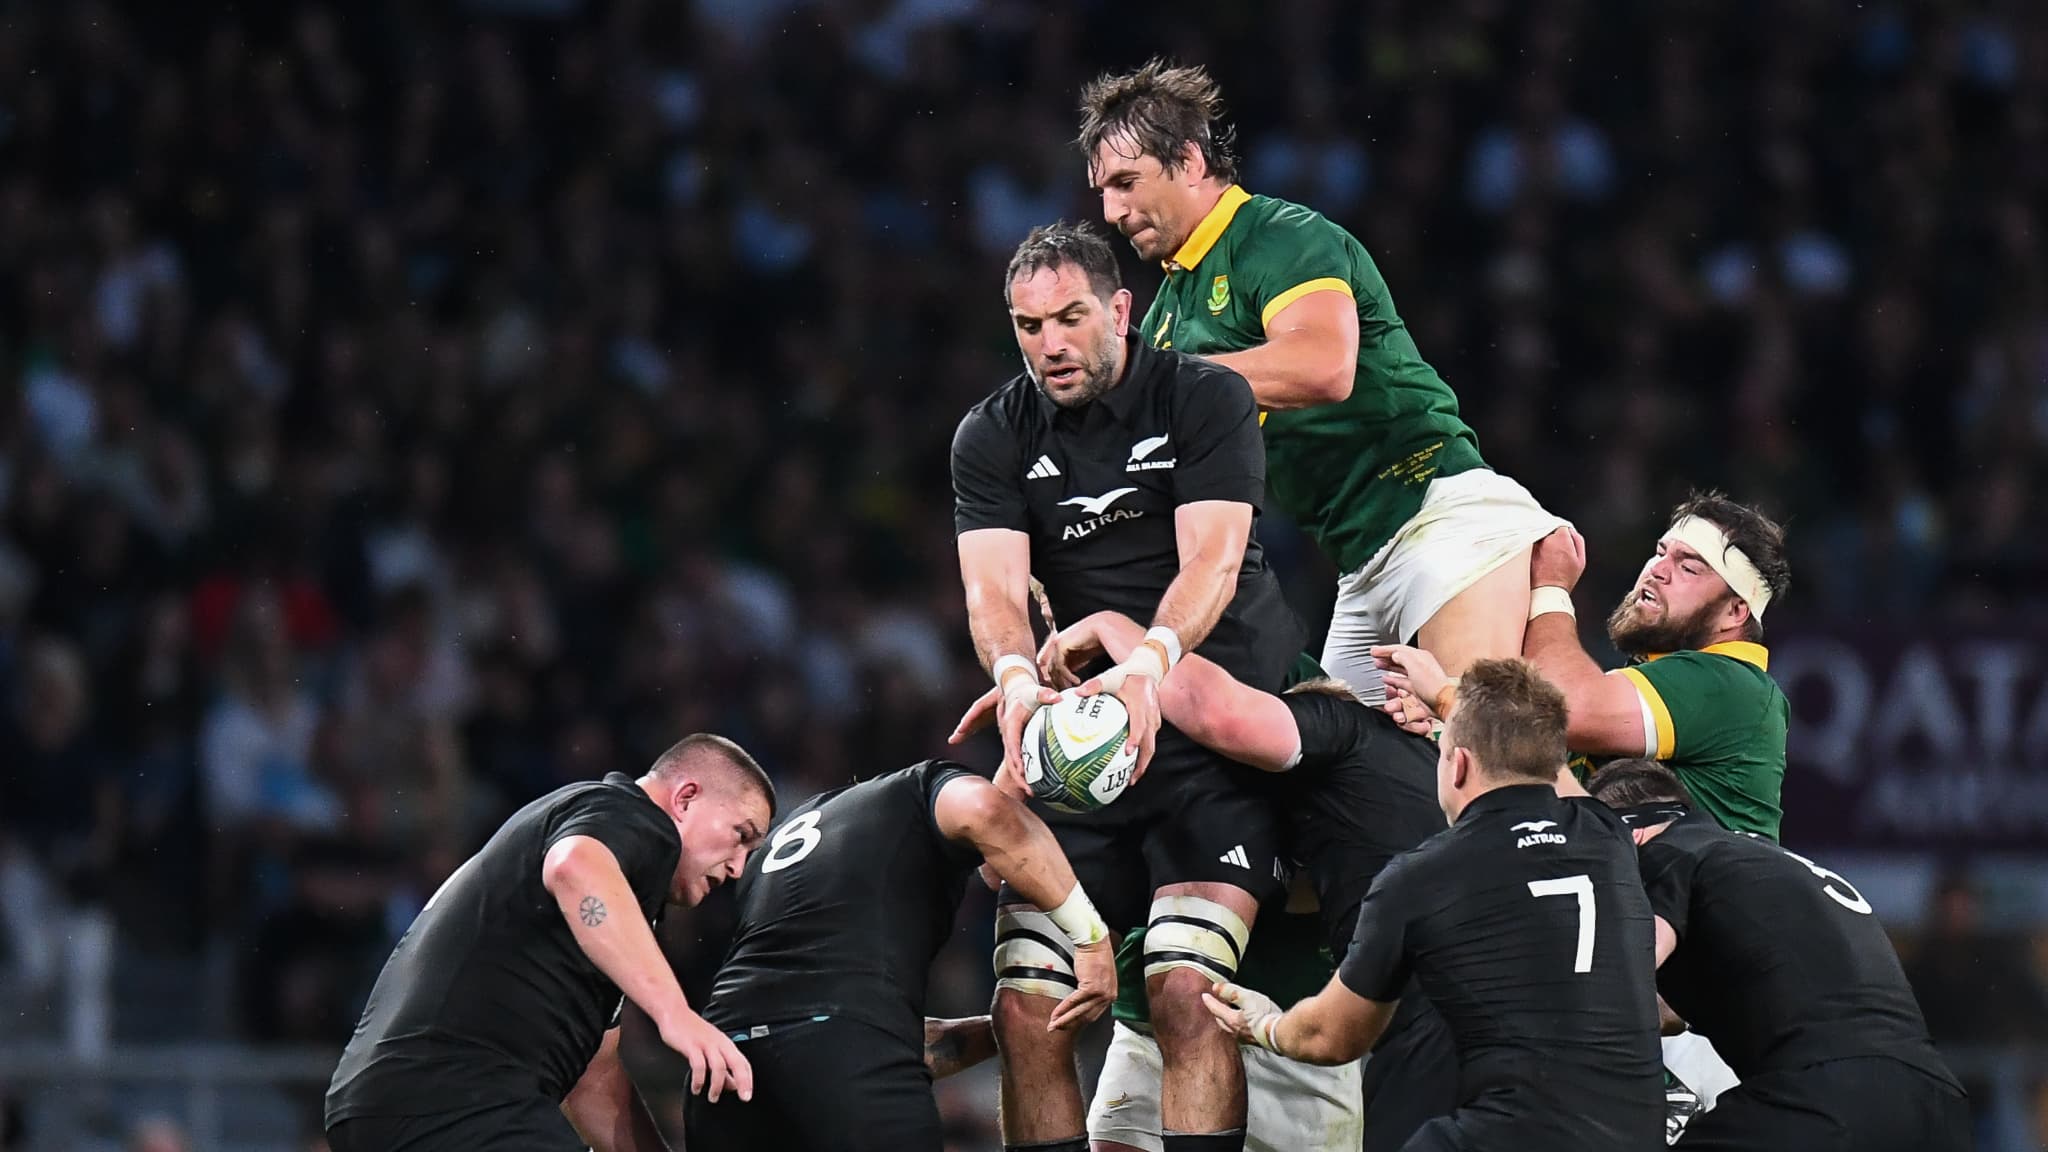 Live Stream – Rugby World Cup Final, D-3: All the information about the New Zealand vs South Africa match live